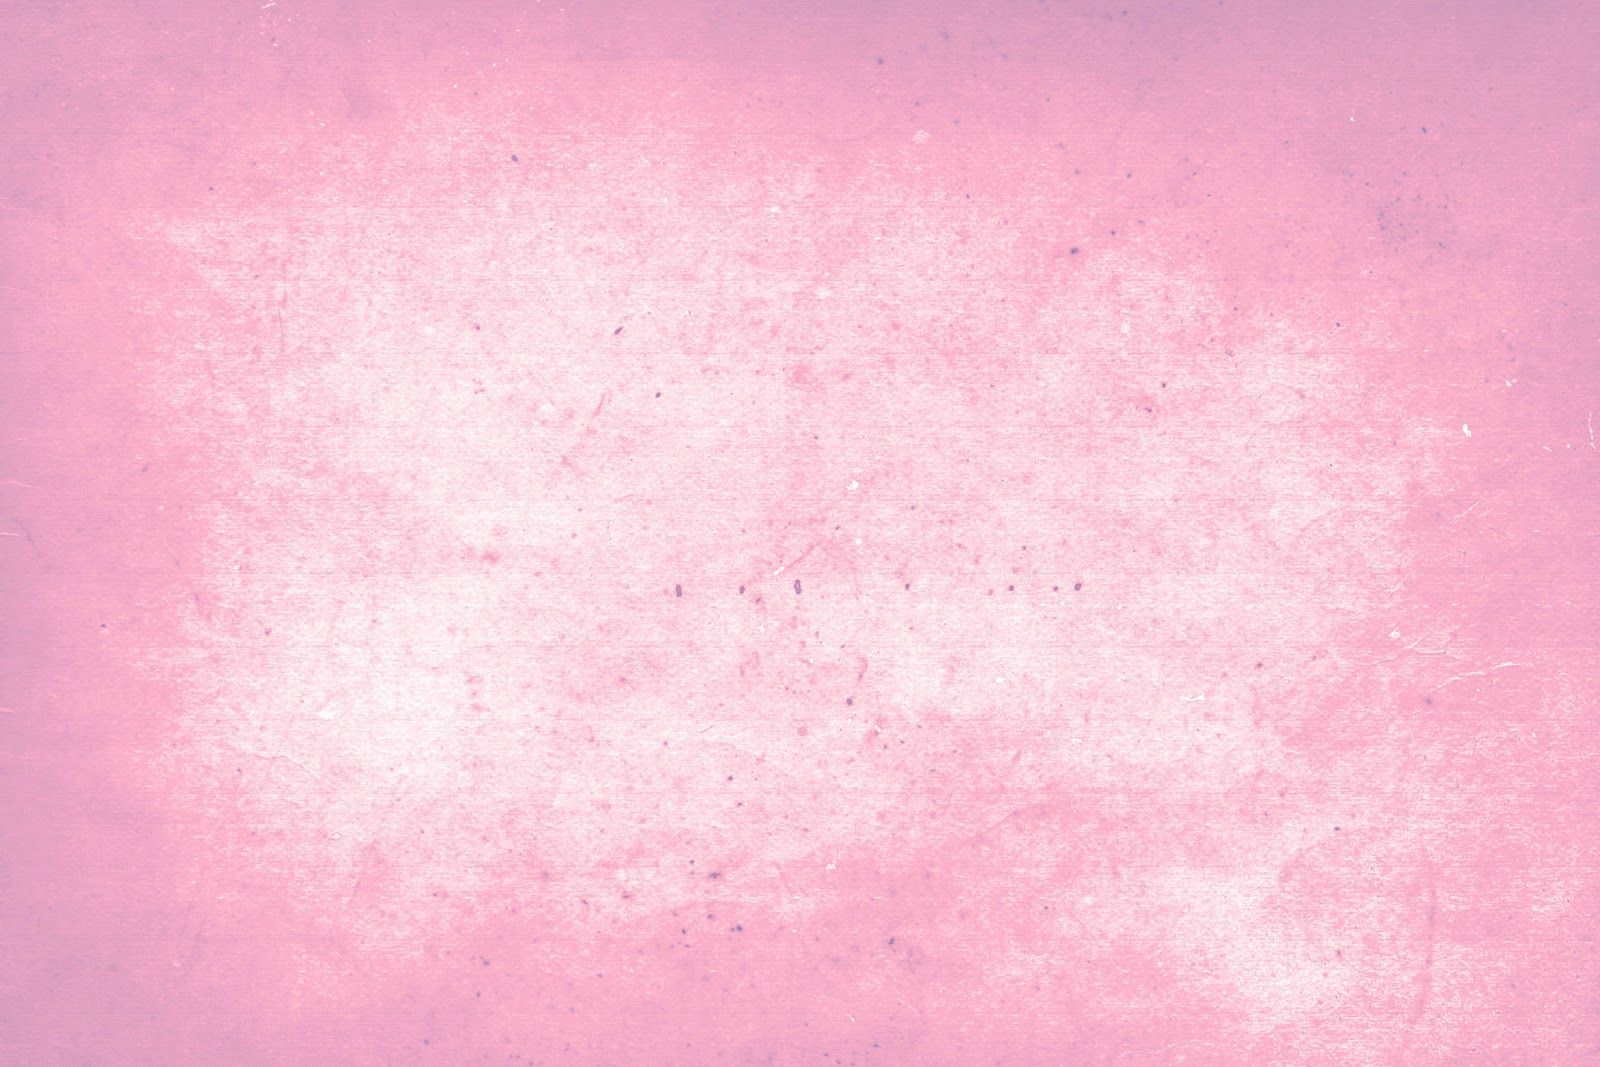 Free Solid Color Grunge Textures. Pink wallpaper, Pink background image, Cute girl wallpaper